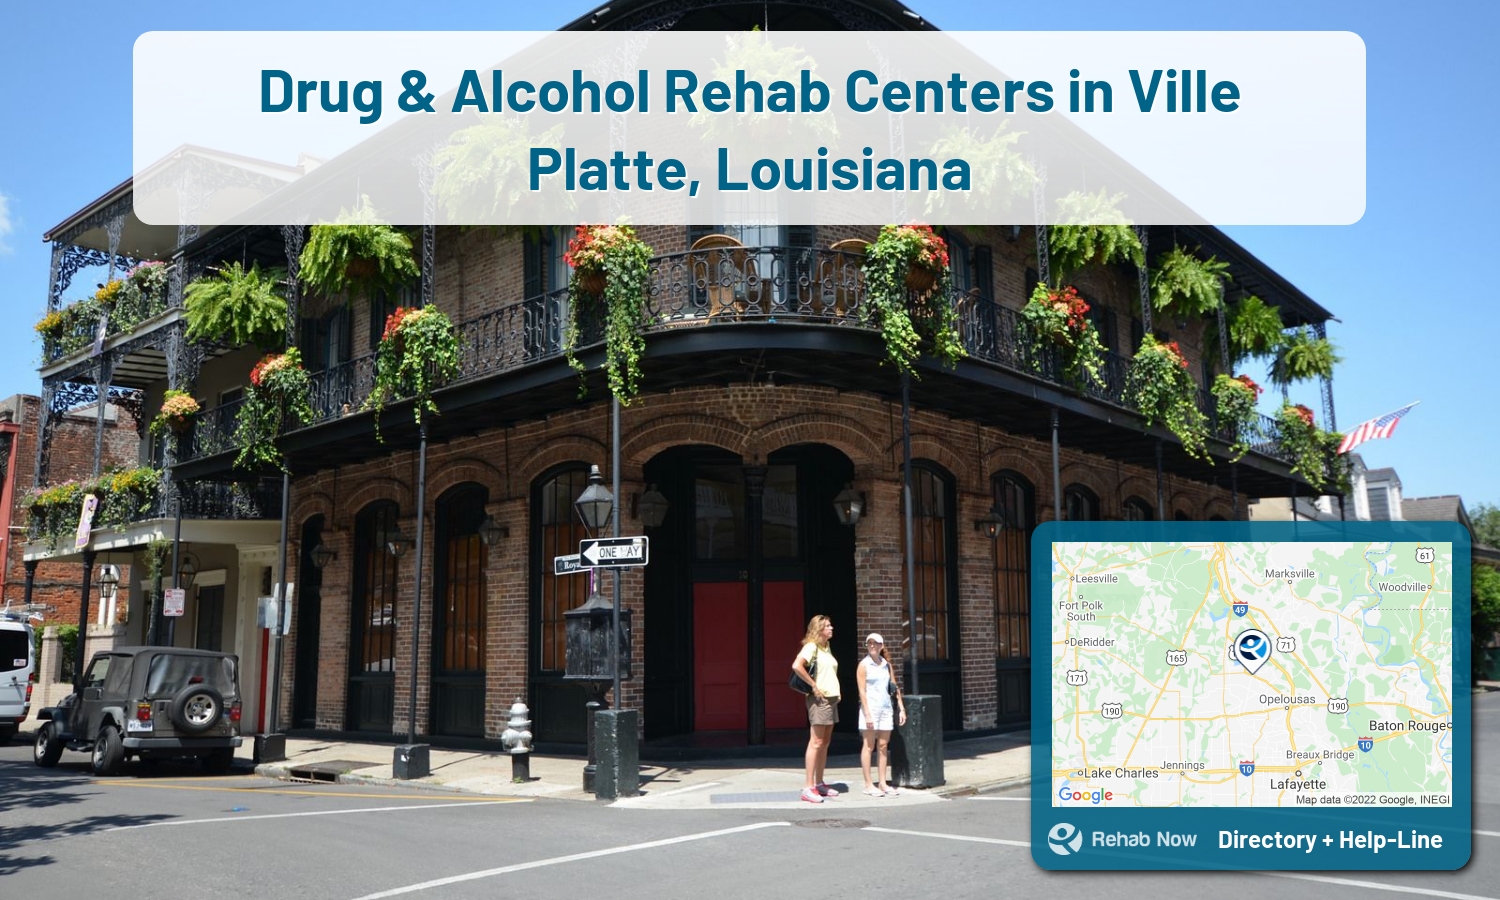 Need treatment nearby in Ville Platte, Louisiana? Choose a drug/alcohol rehab center from our list, or call our hotline now for free help.